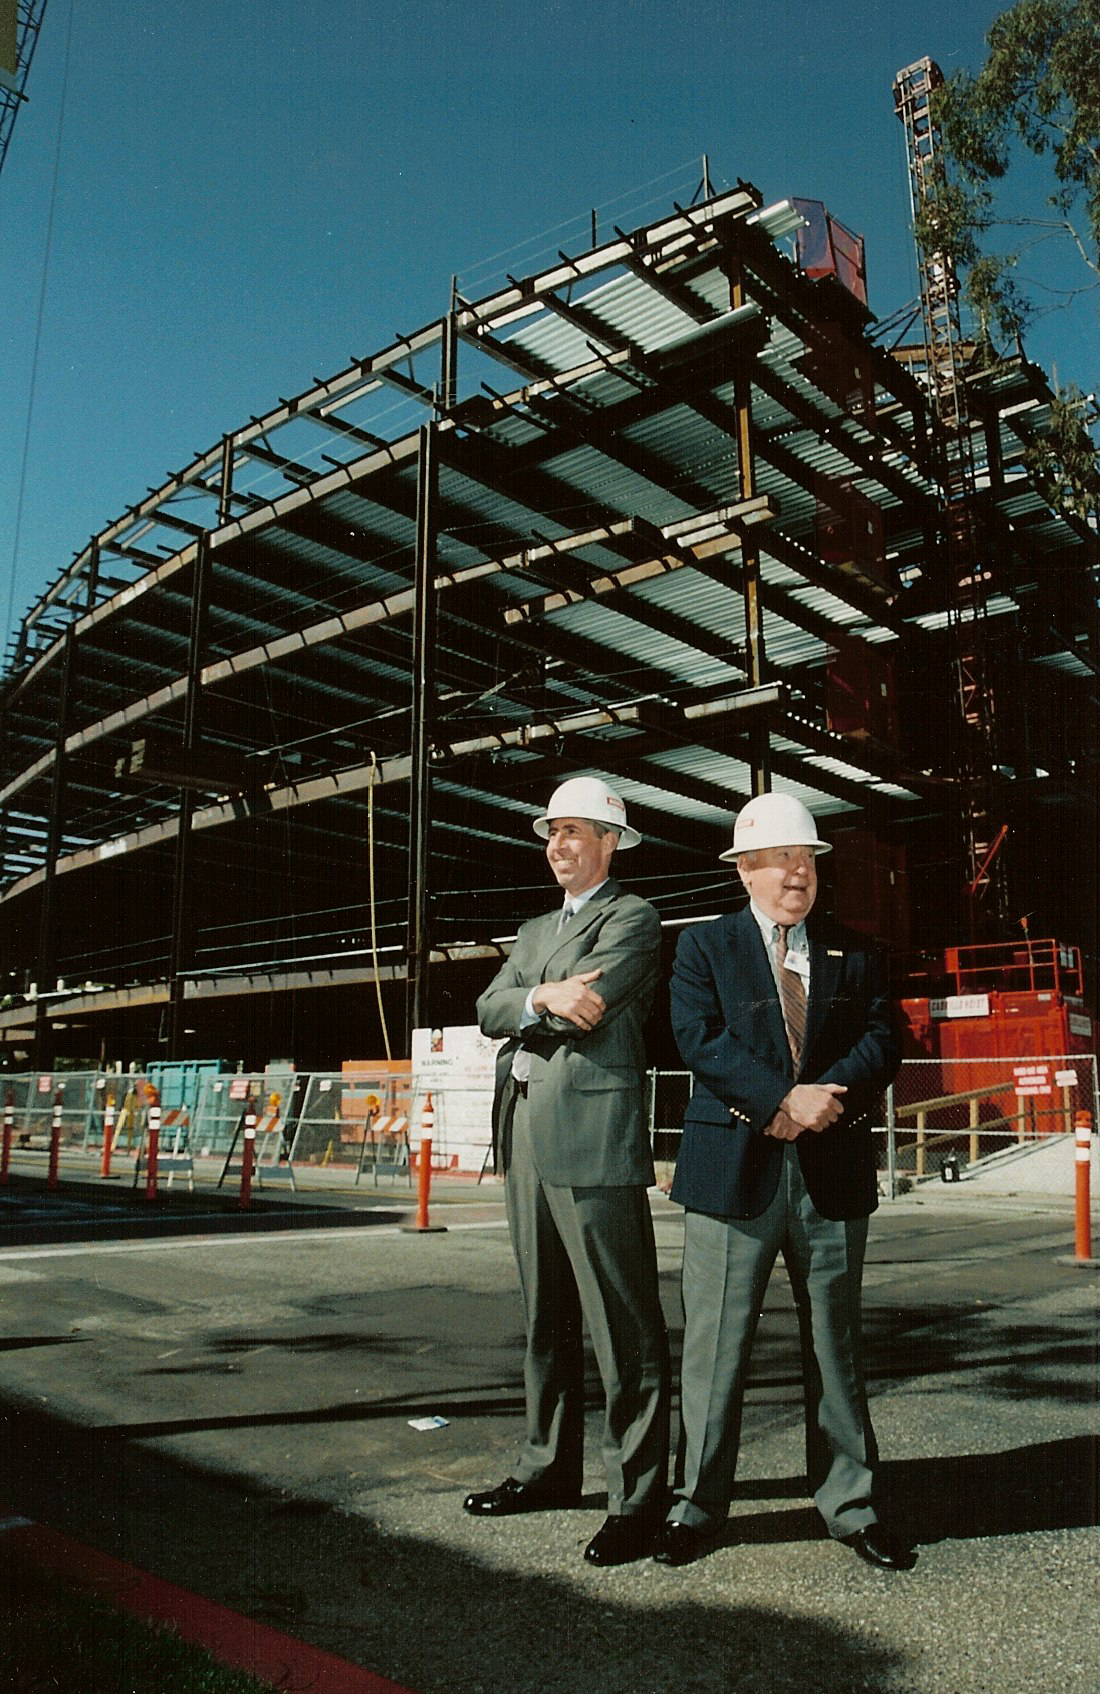 Craig Leach and George Graham on the Lundquist Tower construction site in 2005.